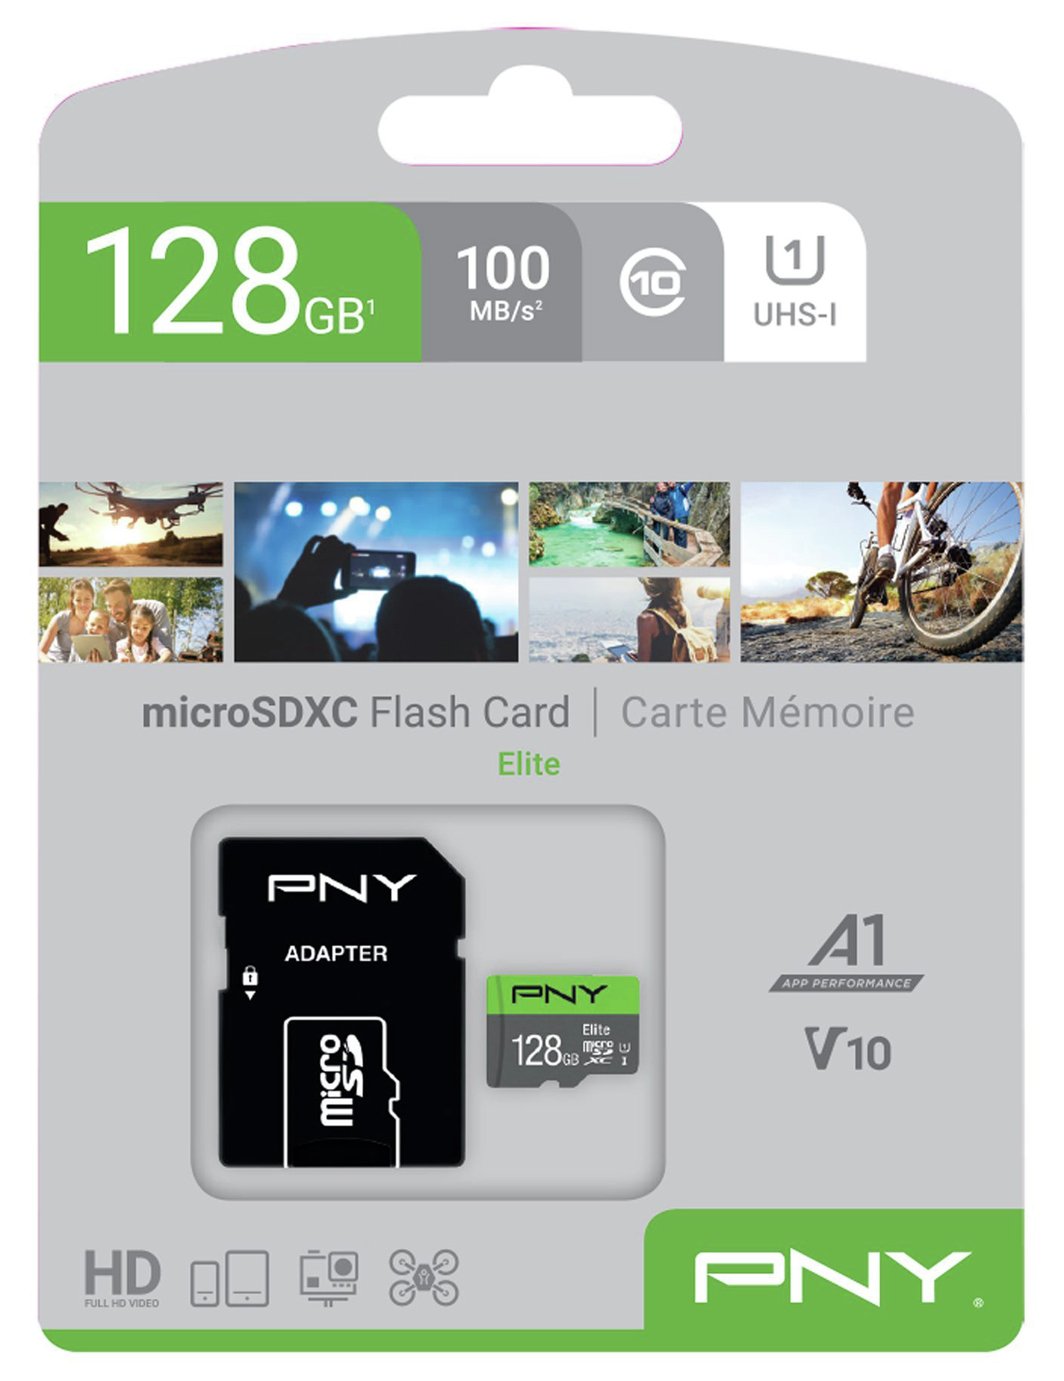 PNY Elite Class 10 UHS-1 microSD Memory Card Review